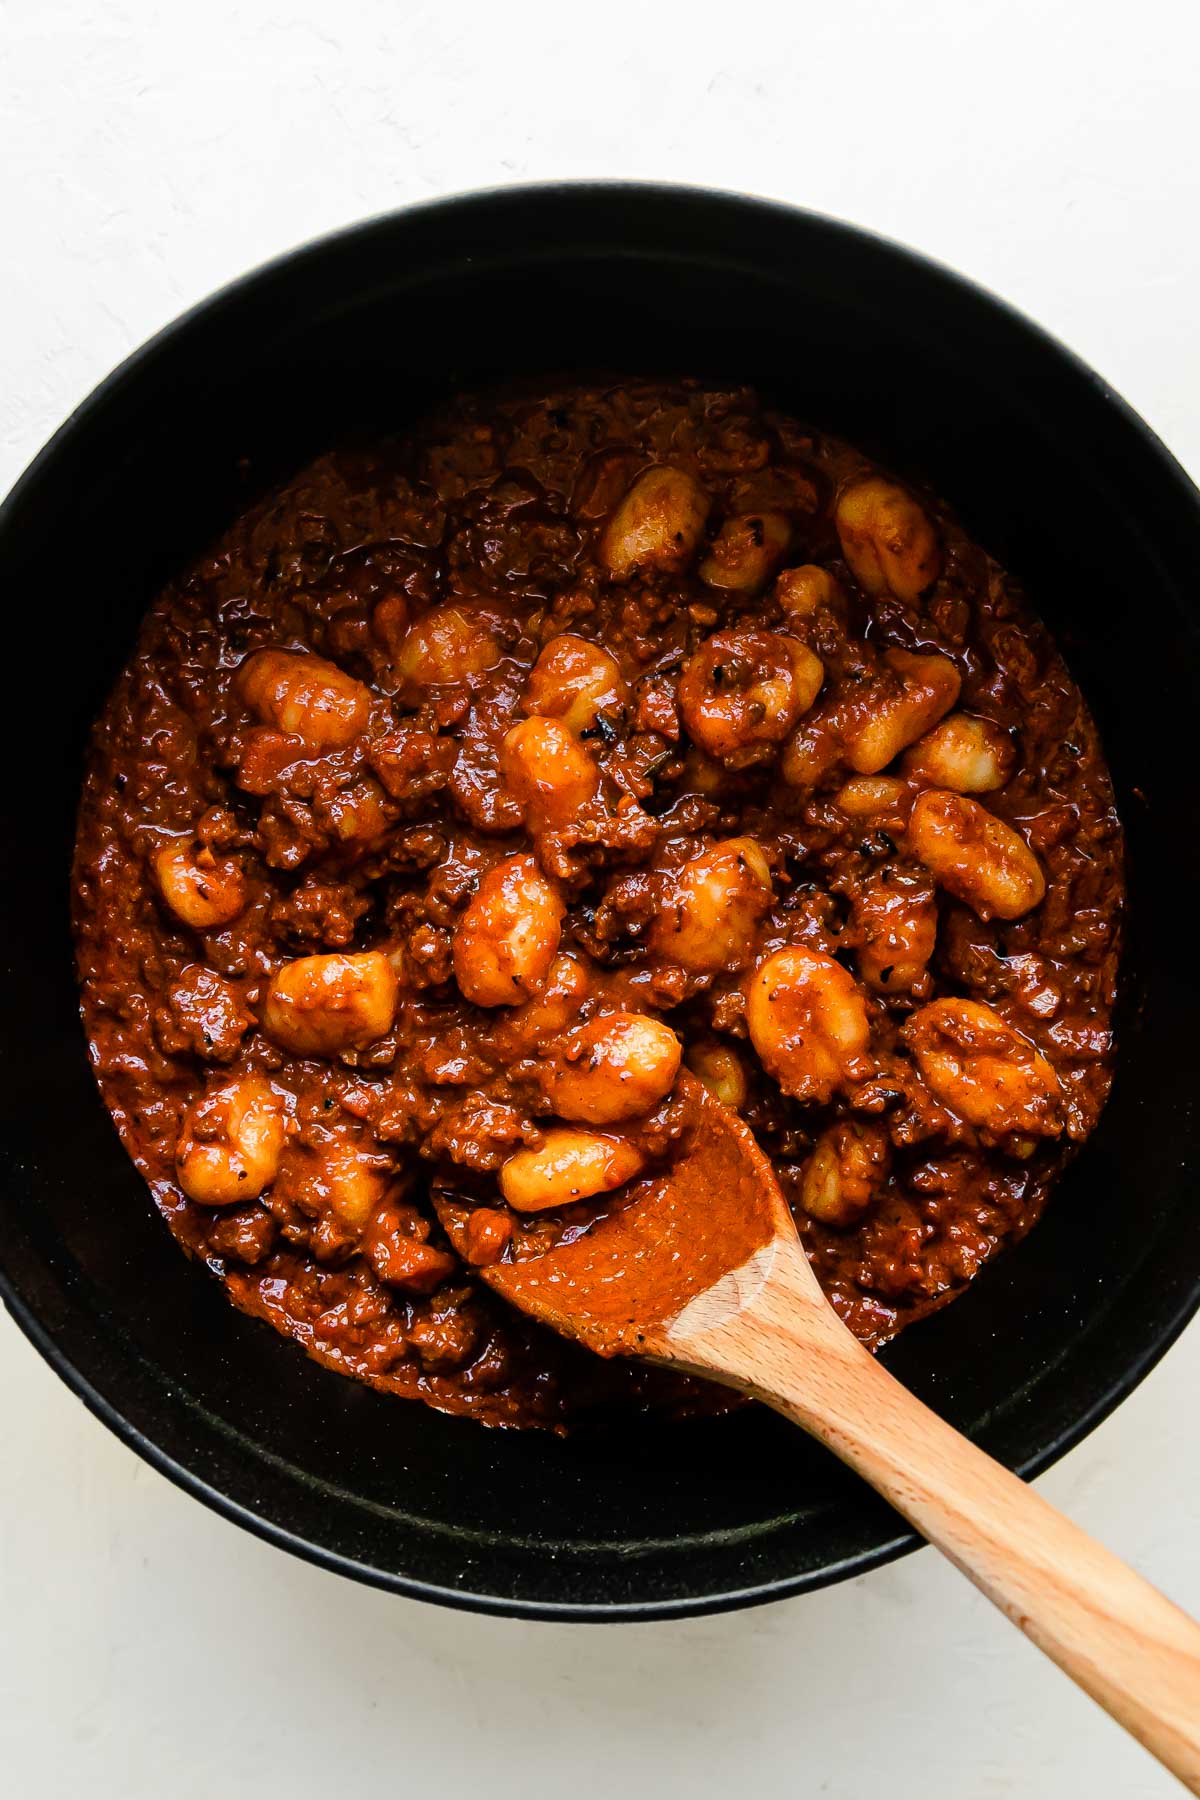 Gnocchi and bolognese sauce are tossed together inside of a large white Staub cocotte that sits atop a creamy white textured surface. A wooden spoon rests inside of the Dutch oven for stirring.